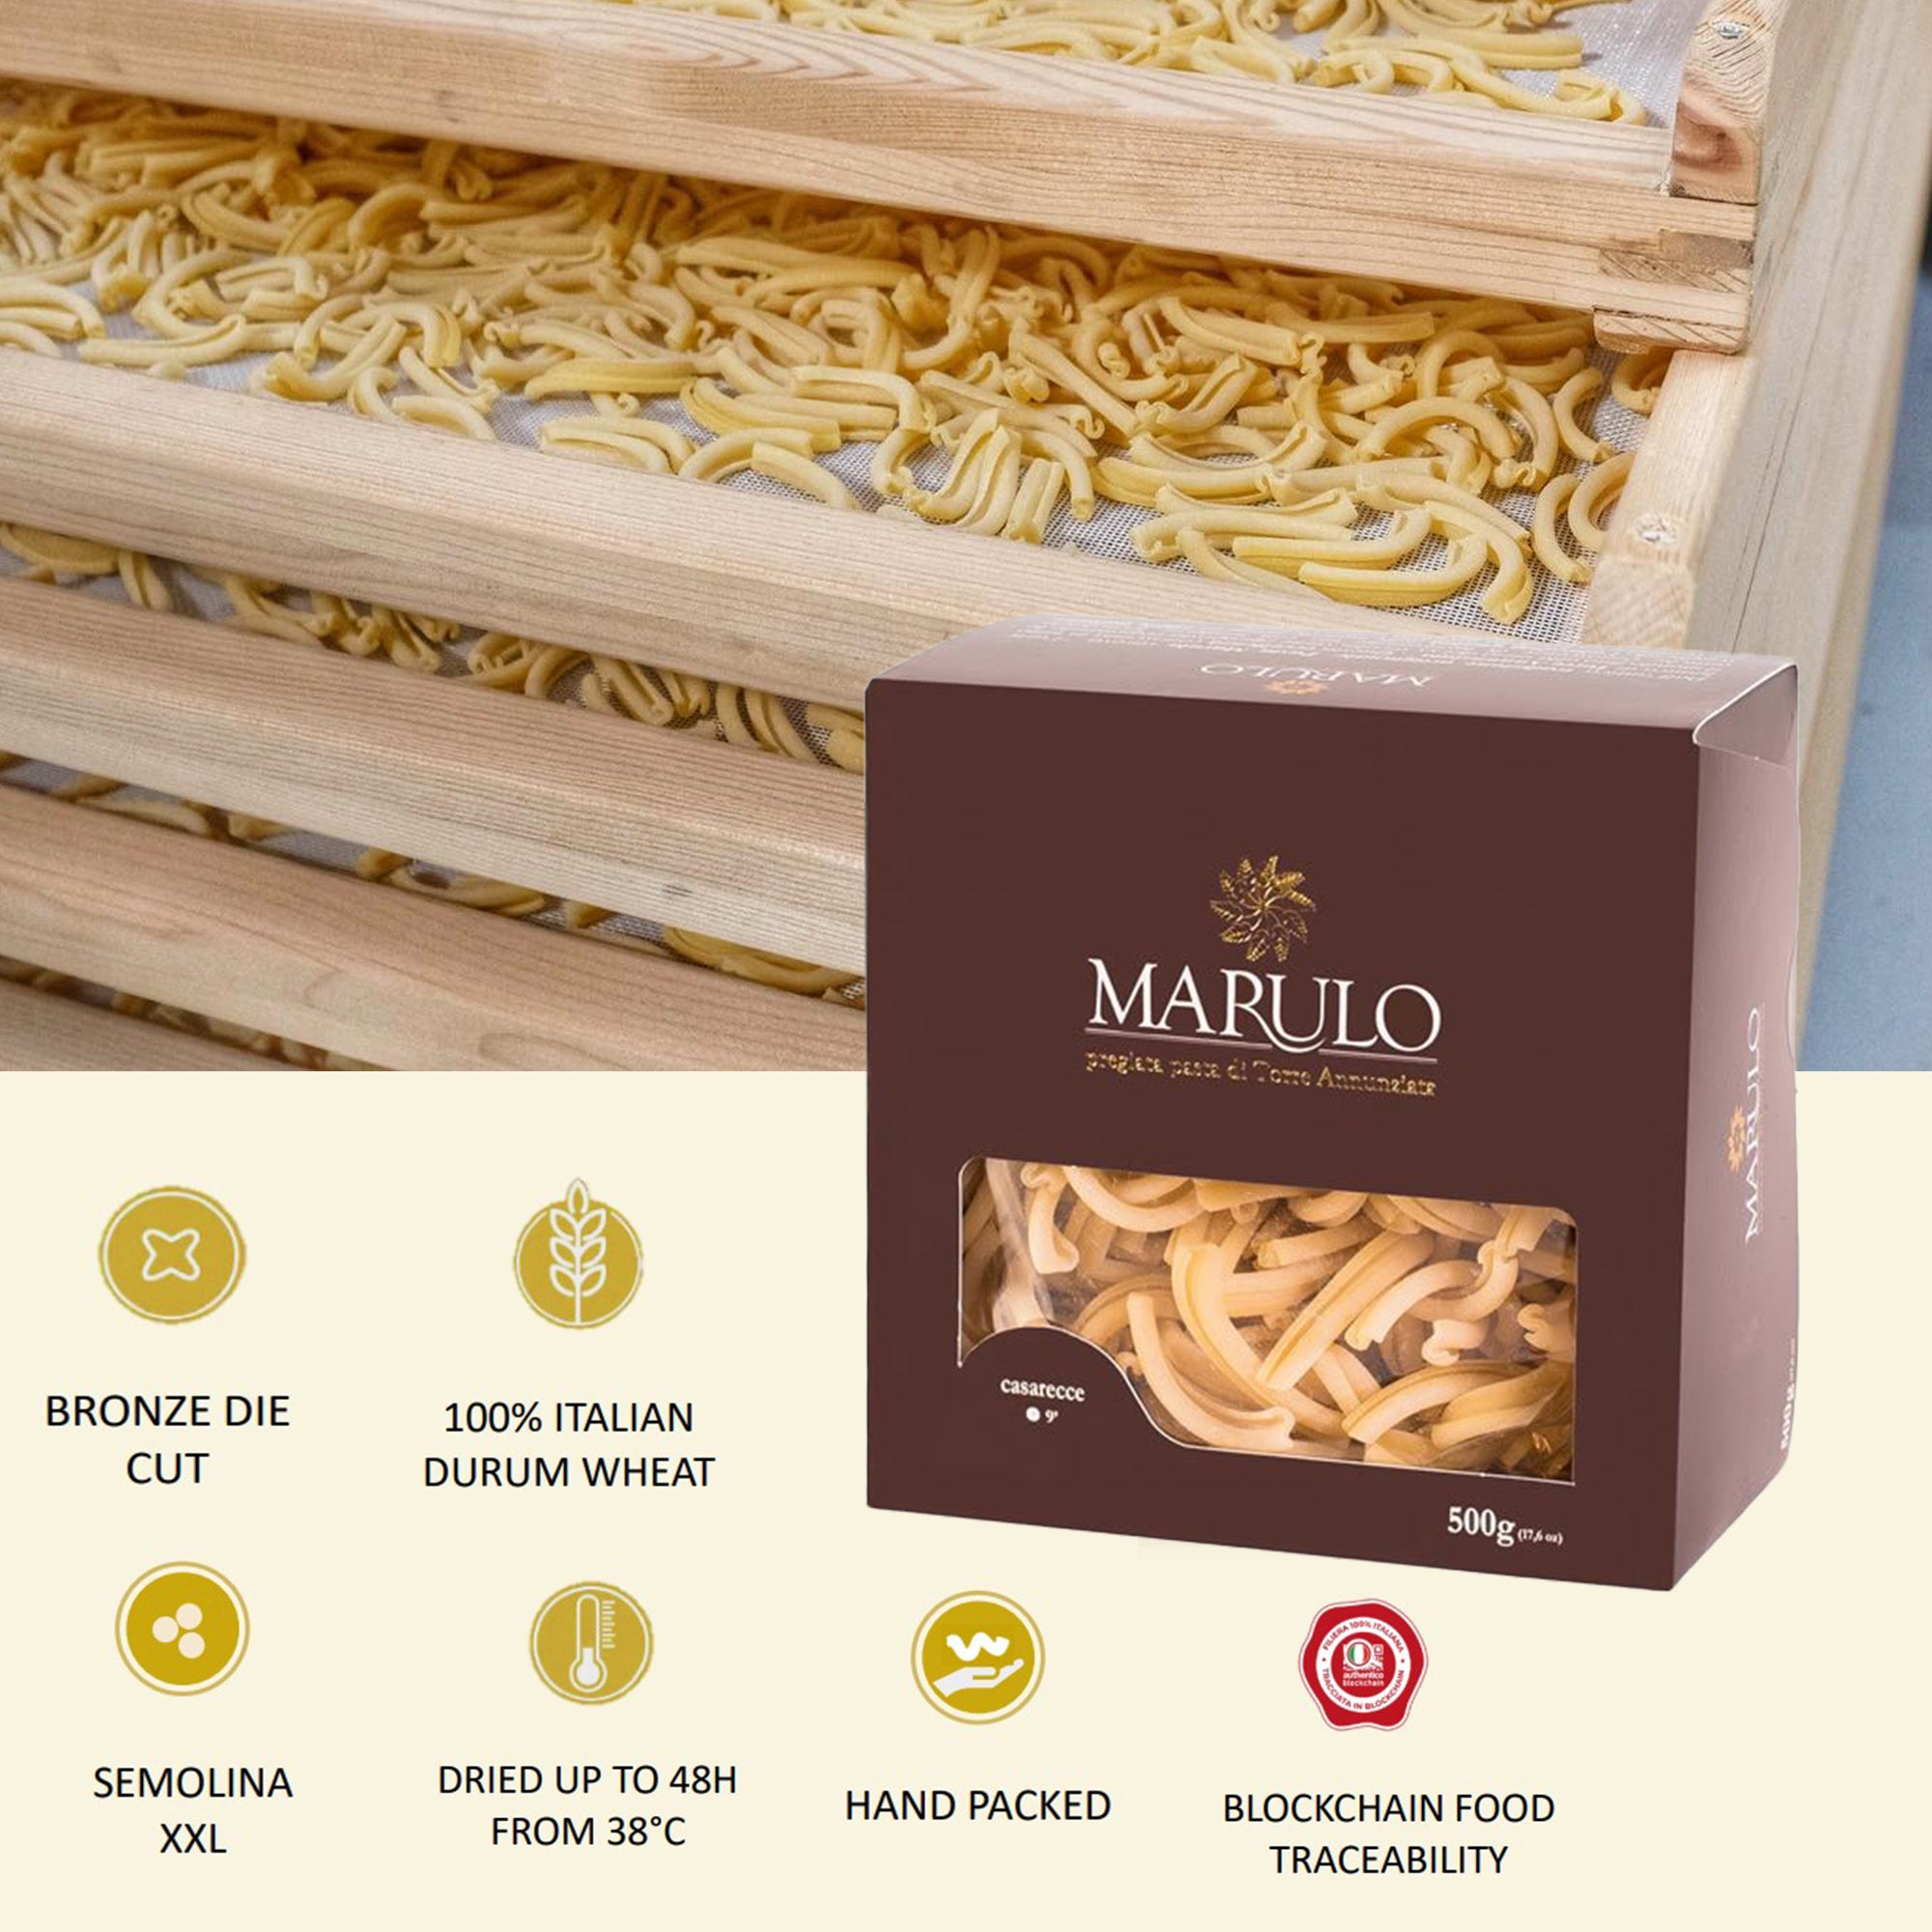 casarecce pasta Marulo Artisan Pasta Spaguetti Bucatini Penne PAsta Calamata Bronze Cut imported pasta from italy casarecce pasta    WholesaleItalianFood.com is pleased to offer  authentic Marulo Artisan Pasta made from the finest, high-quality ingredients at an affordable price. We are passionate and dedicated to our products, the environment, and providing a fantastic variety of pasta like our delicious Marulo Artisan Pasta.